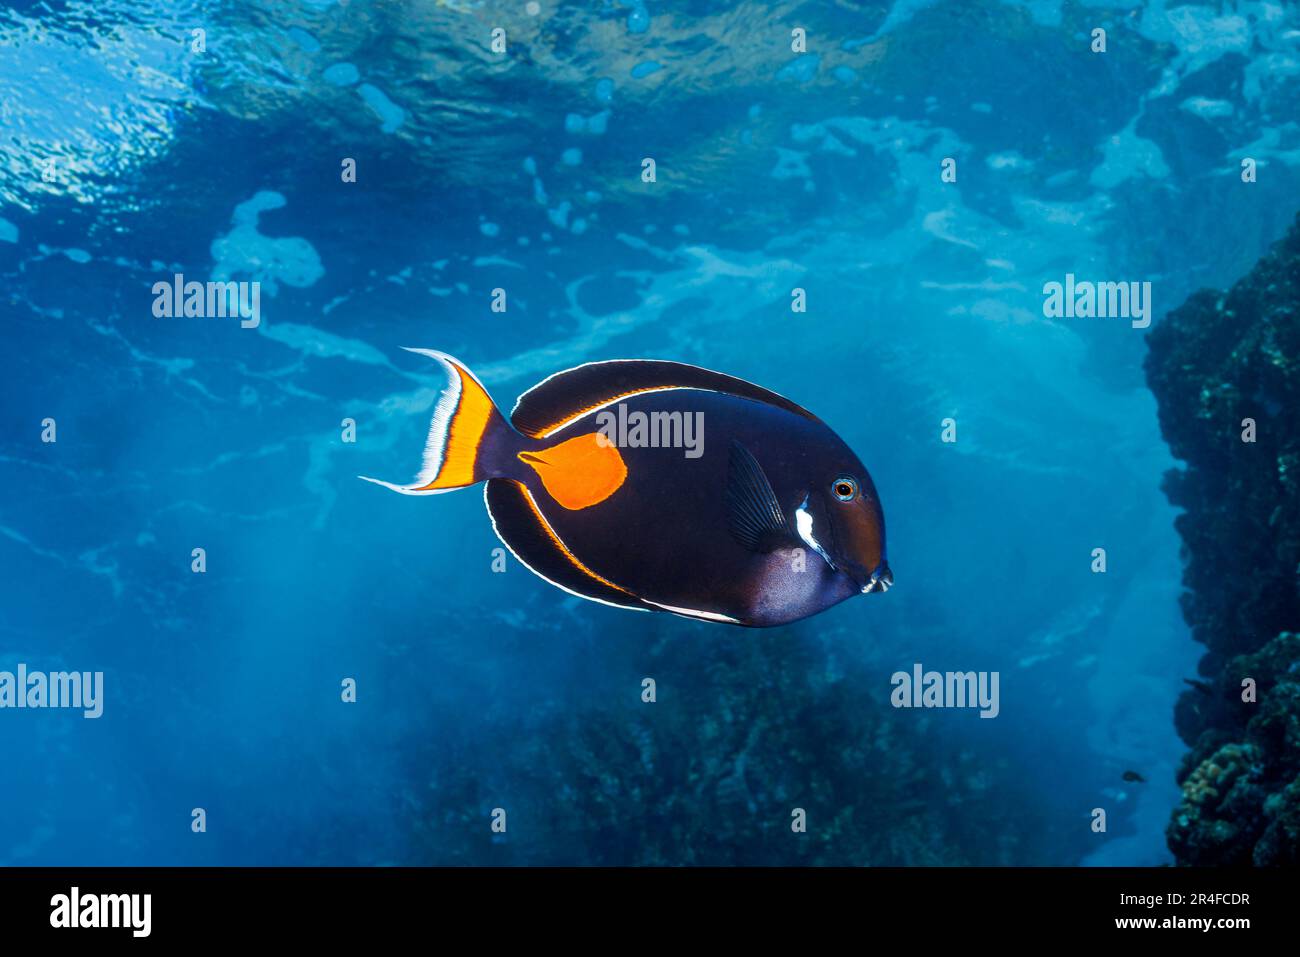 The achilles tang, Acanthurus achilles, reaches 10 inches in length and are often found in the shallow surge zone of the reef, Hawaii. Stock Photo